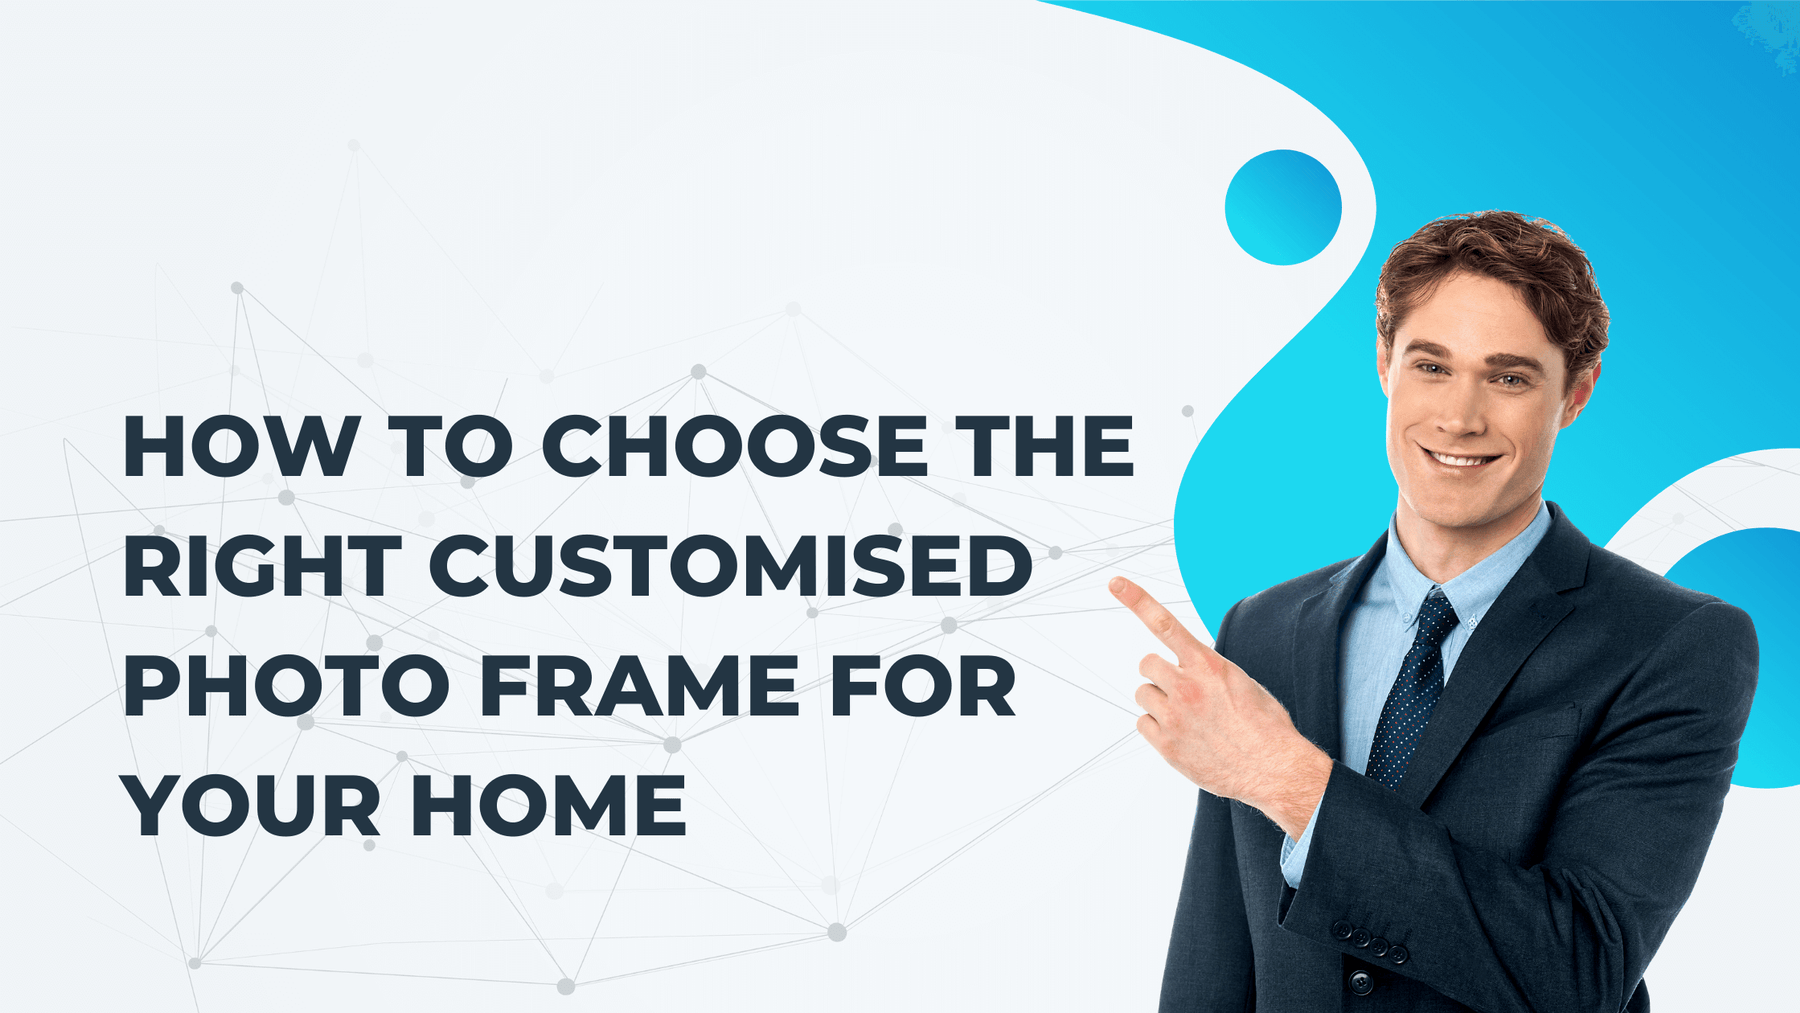 How to Choose the Right Customised Photo Frame for Your Home